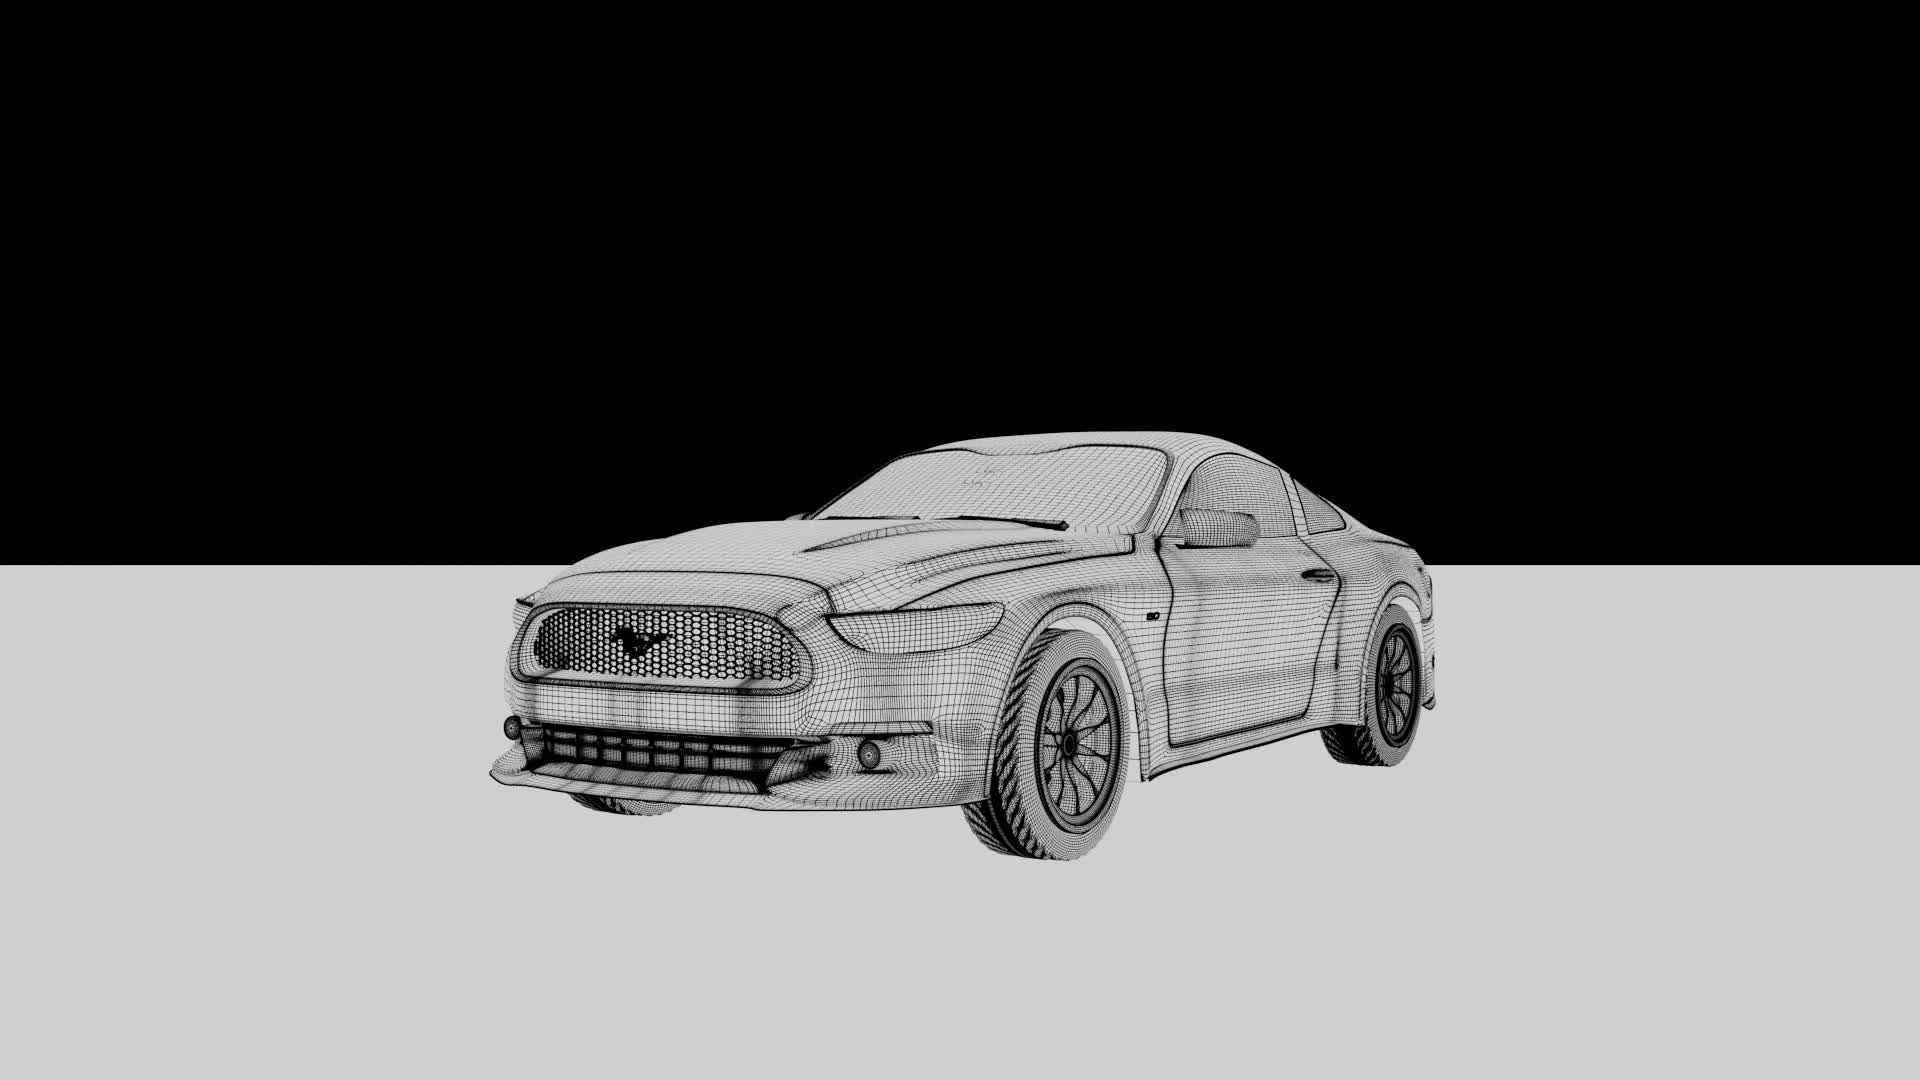 Ford Mustang Design Sketch by Kemal Curic  Design sketch Mustang art  Mustang